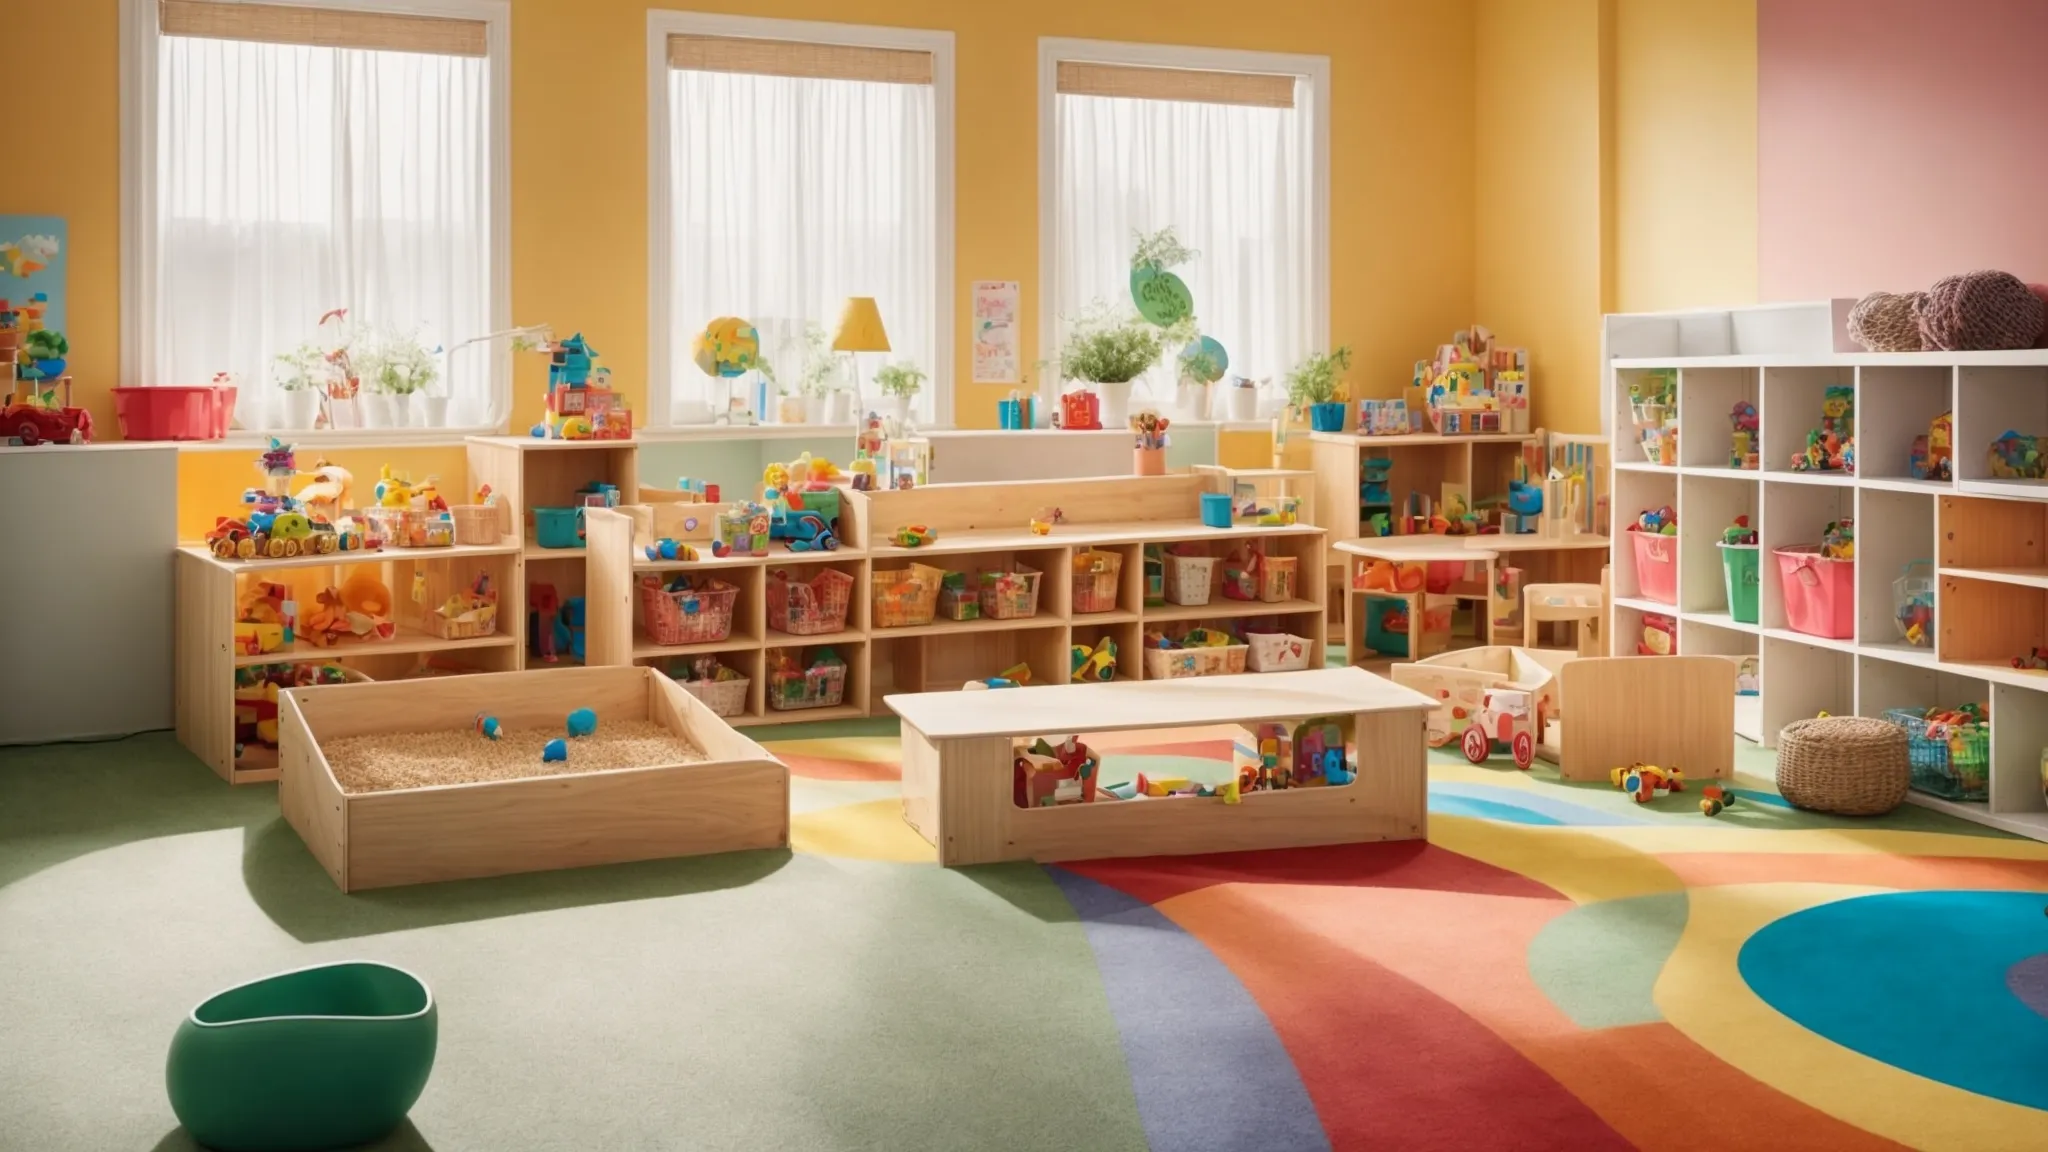 a daycare provider decoratively sets up a play area with educational toys and crafts, ready for a vibrant photo to post on social media.